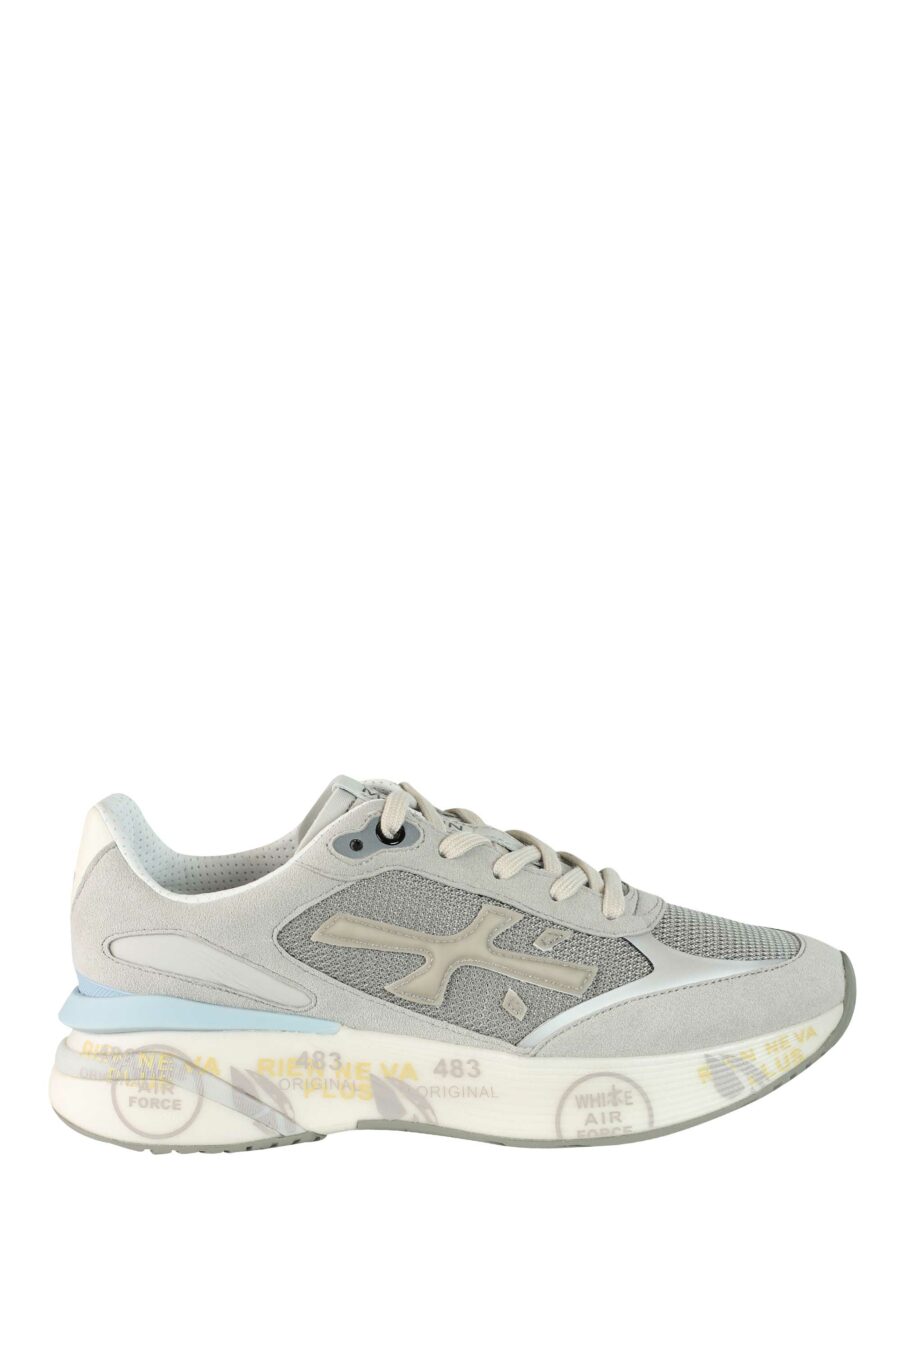 Grey trainers with sky blue "moe run 6333" - 8058326252810